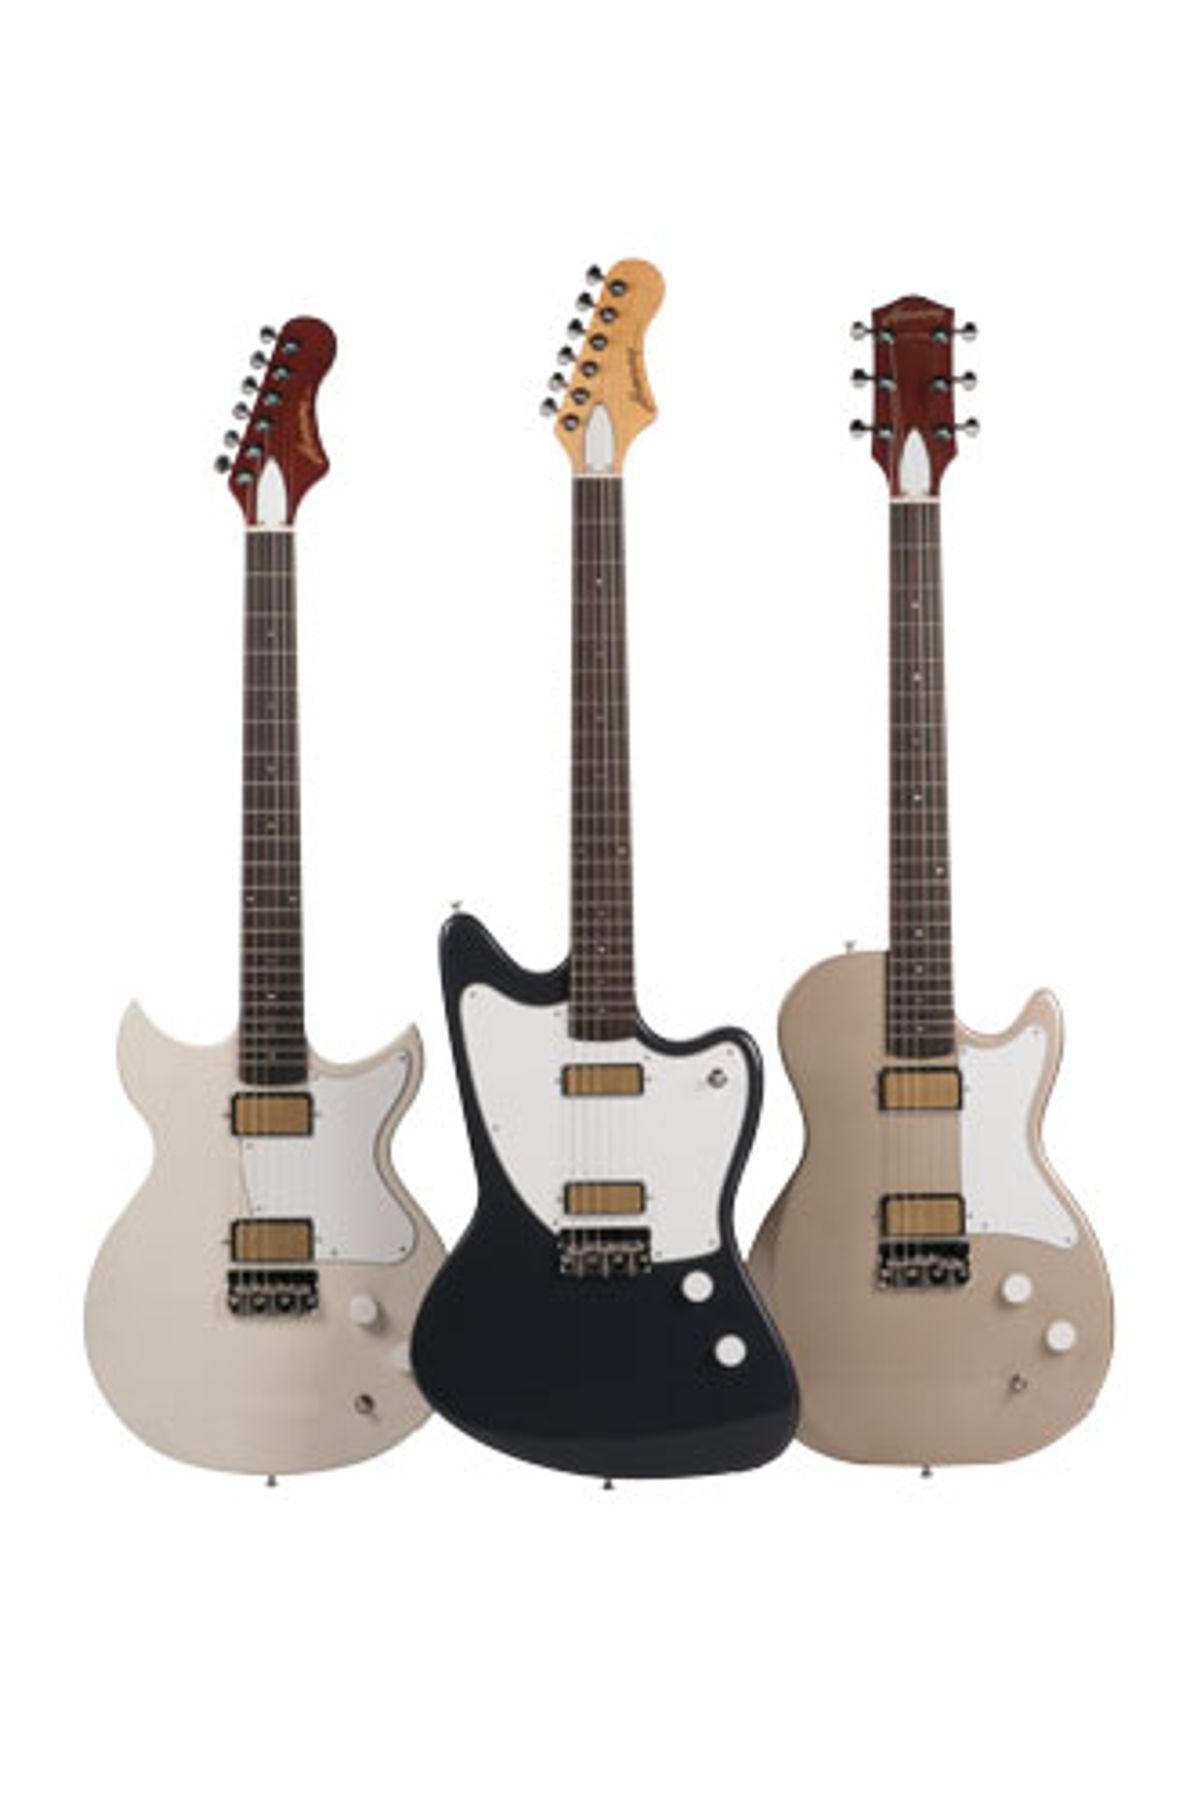 Harmony Guitars Announces the Silhouette, Rebel, and Jupiter Models